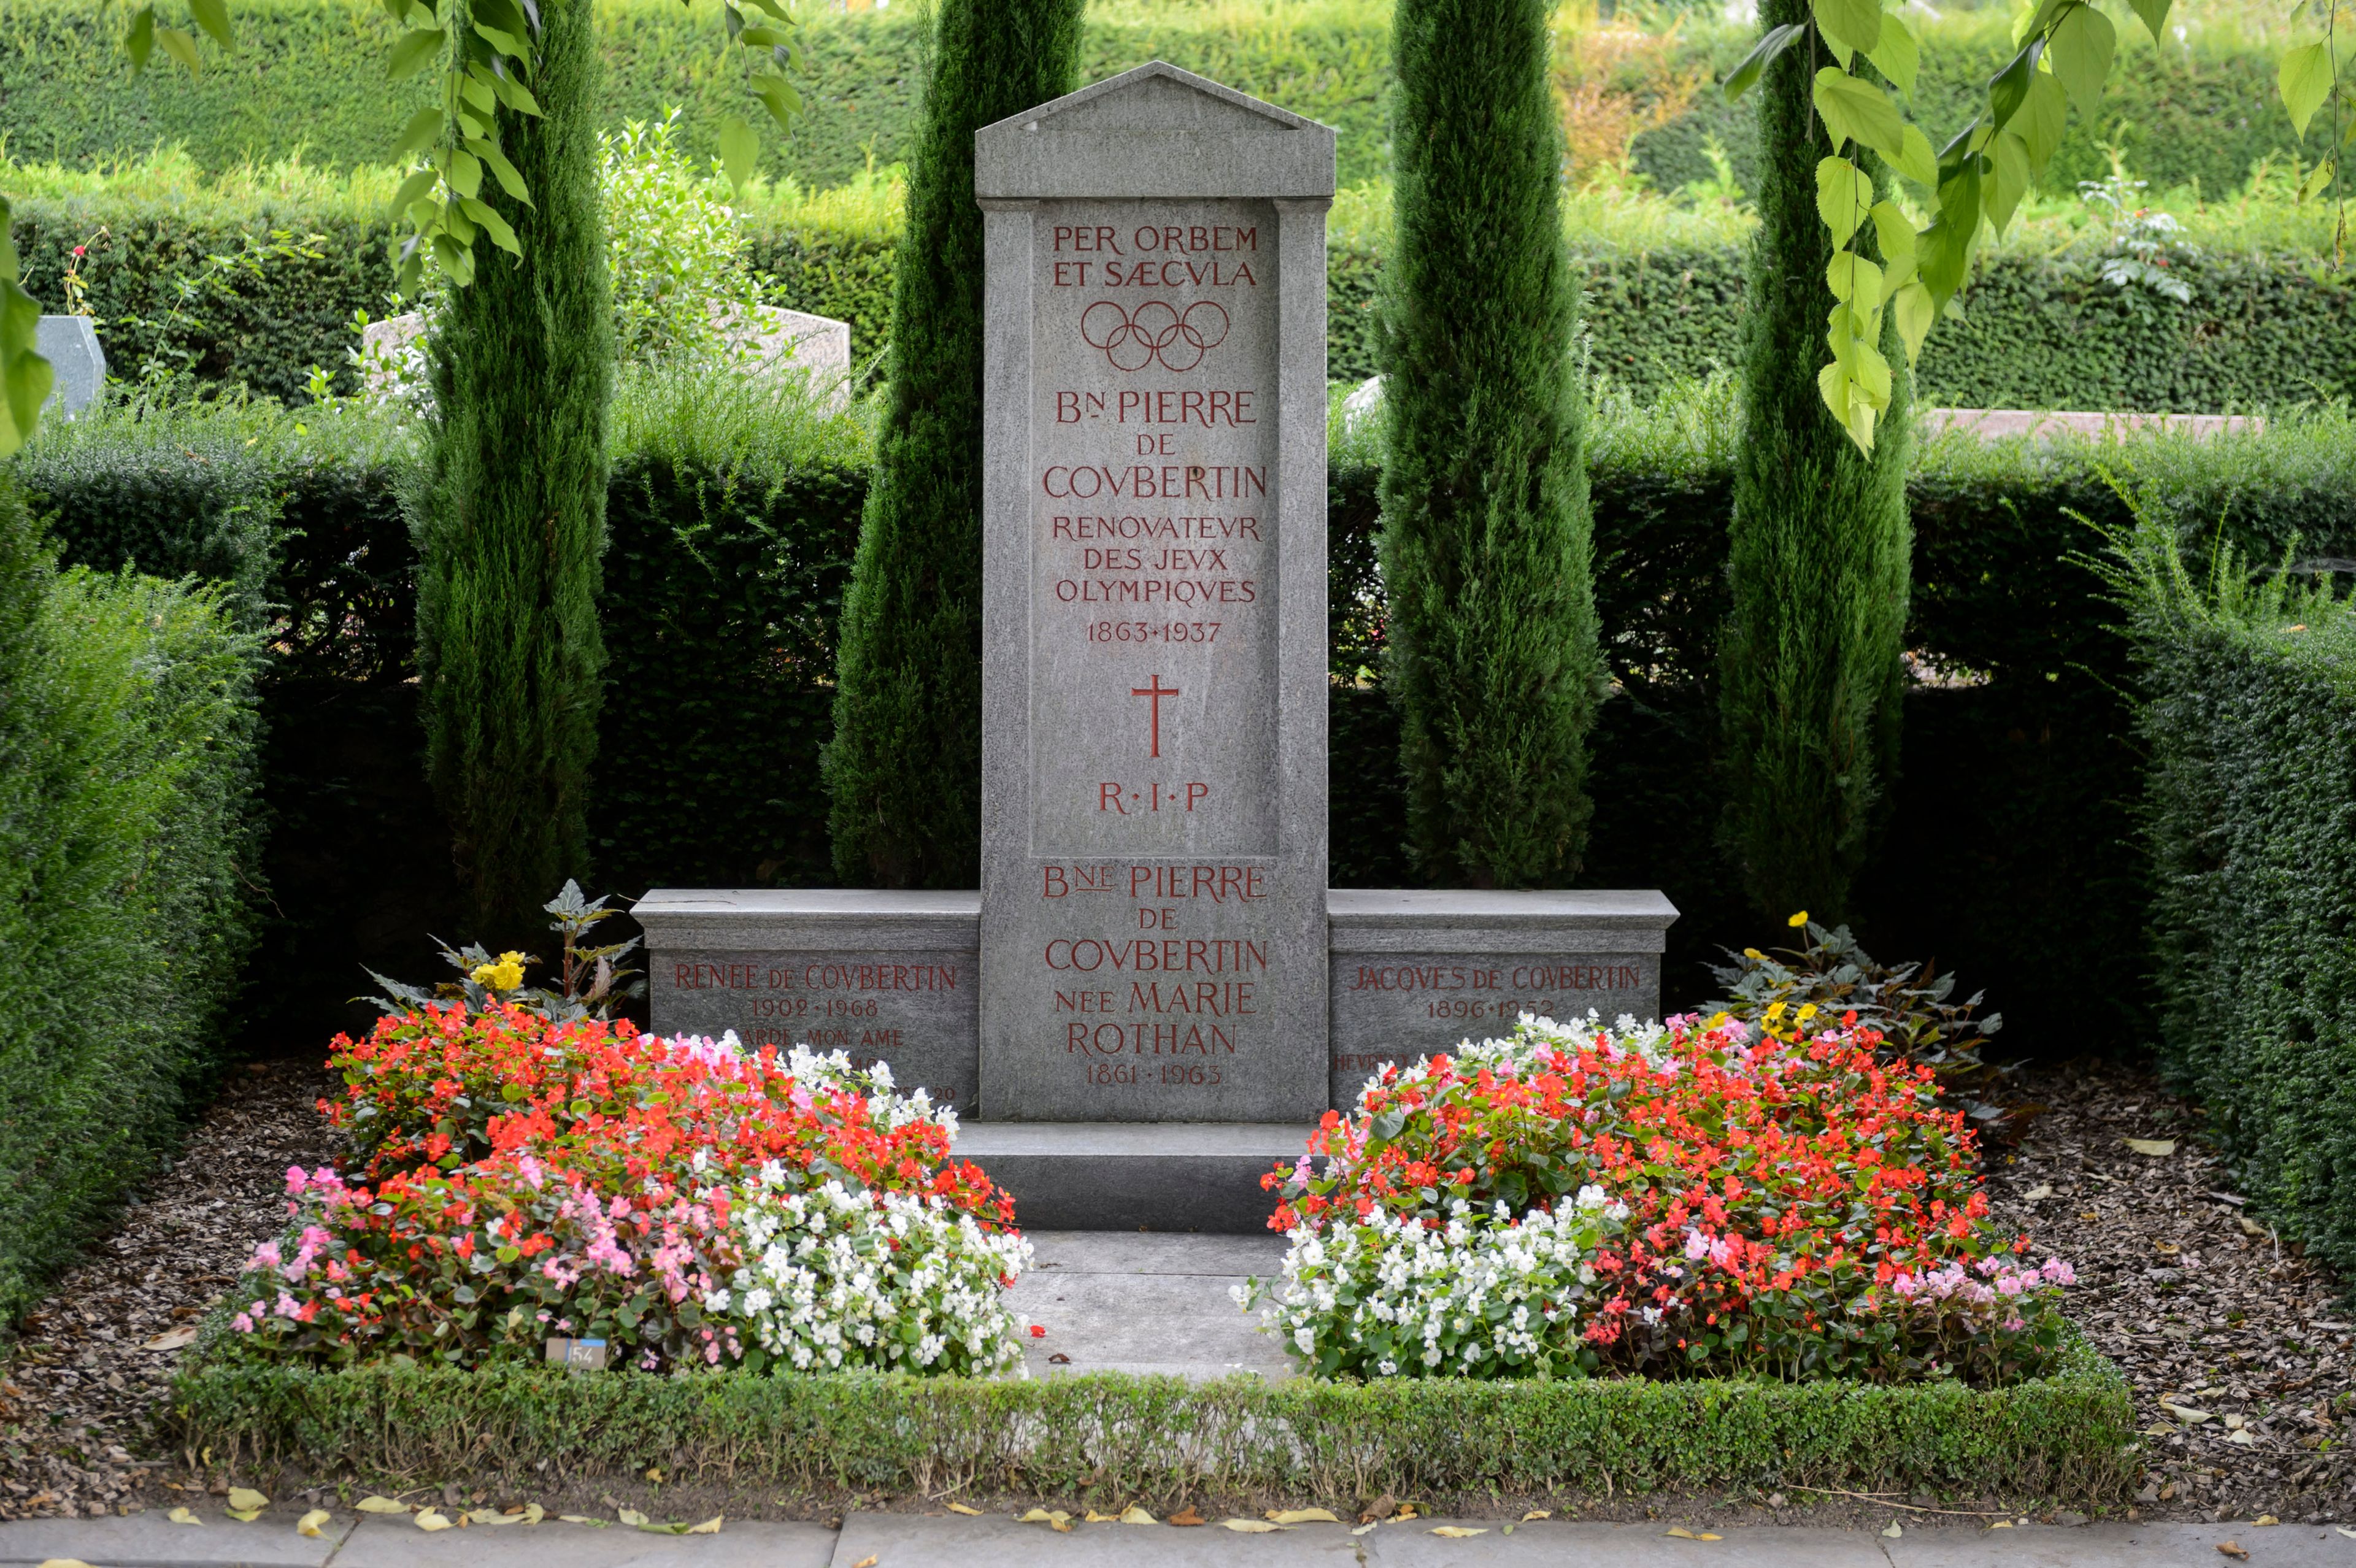 FILE - The grave of International Olympic Committee (IOC) founder baron Pierre de Coubertin is photographed at the Bois-de-Vaux cemetery, in Lausanne, Switzerland, Thursday, Sept.11, 2014. Coubertin envisioned the Olympics as a pacifist exercise that could foster international cooperation and peace, especially in the wake of France's defeat in the Franco-Prussian War. (AP Photo/Keystone,Laurent Gillieron, File)